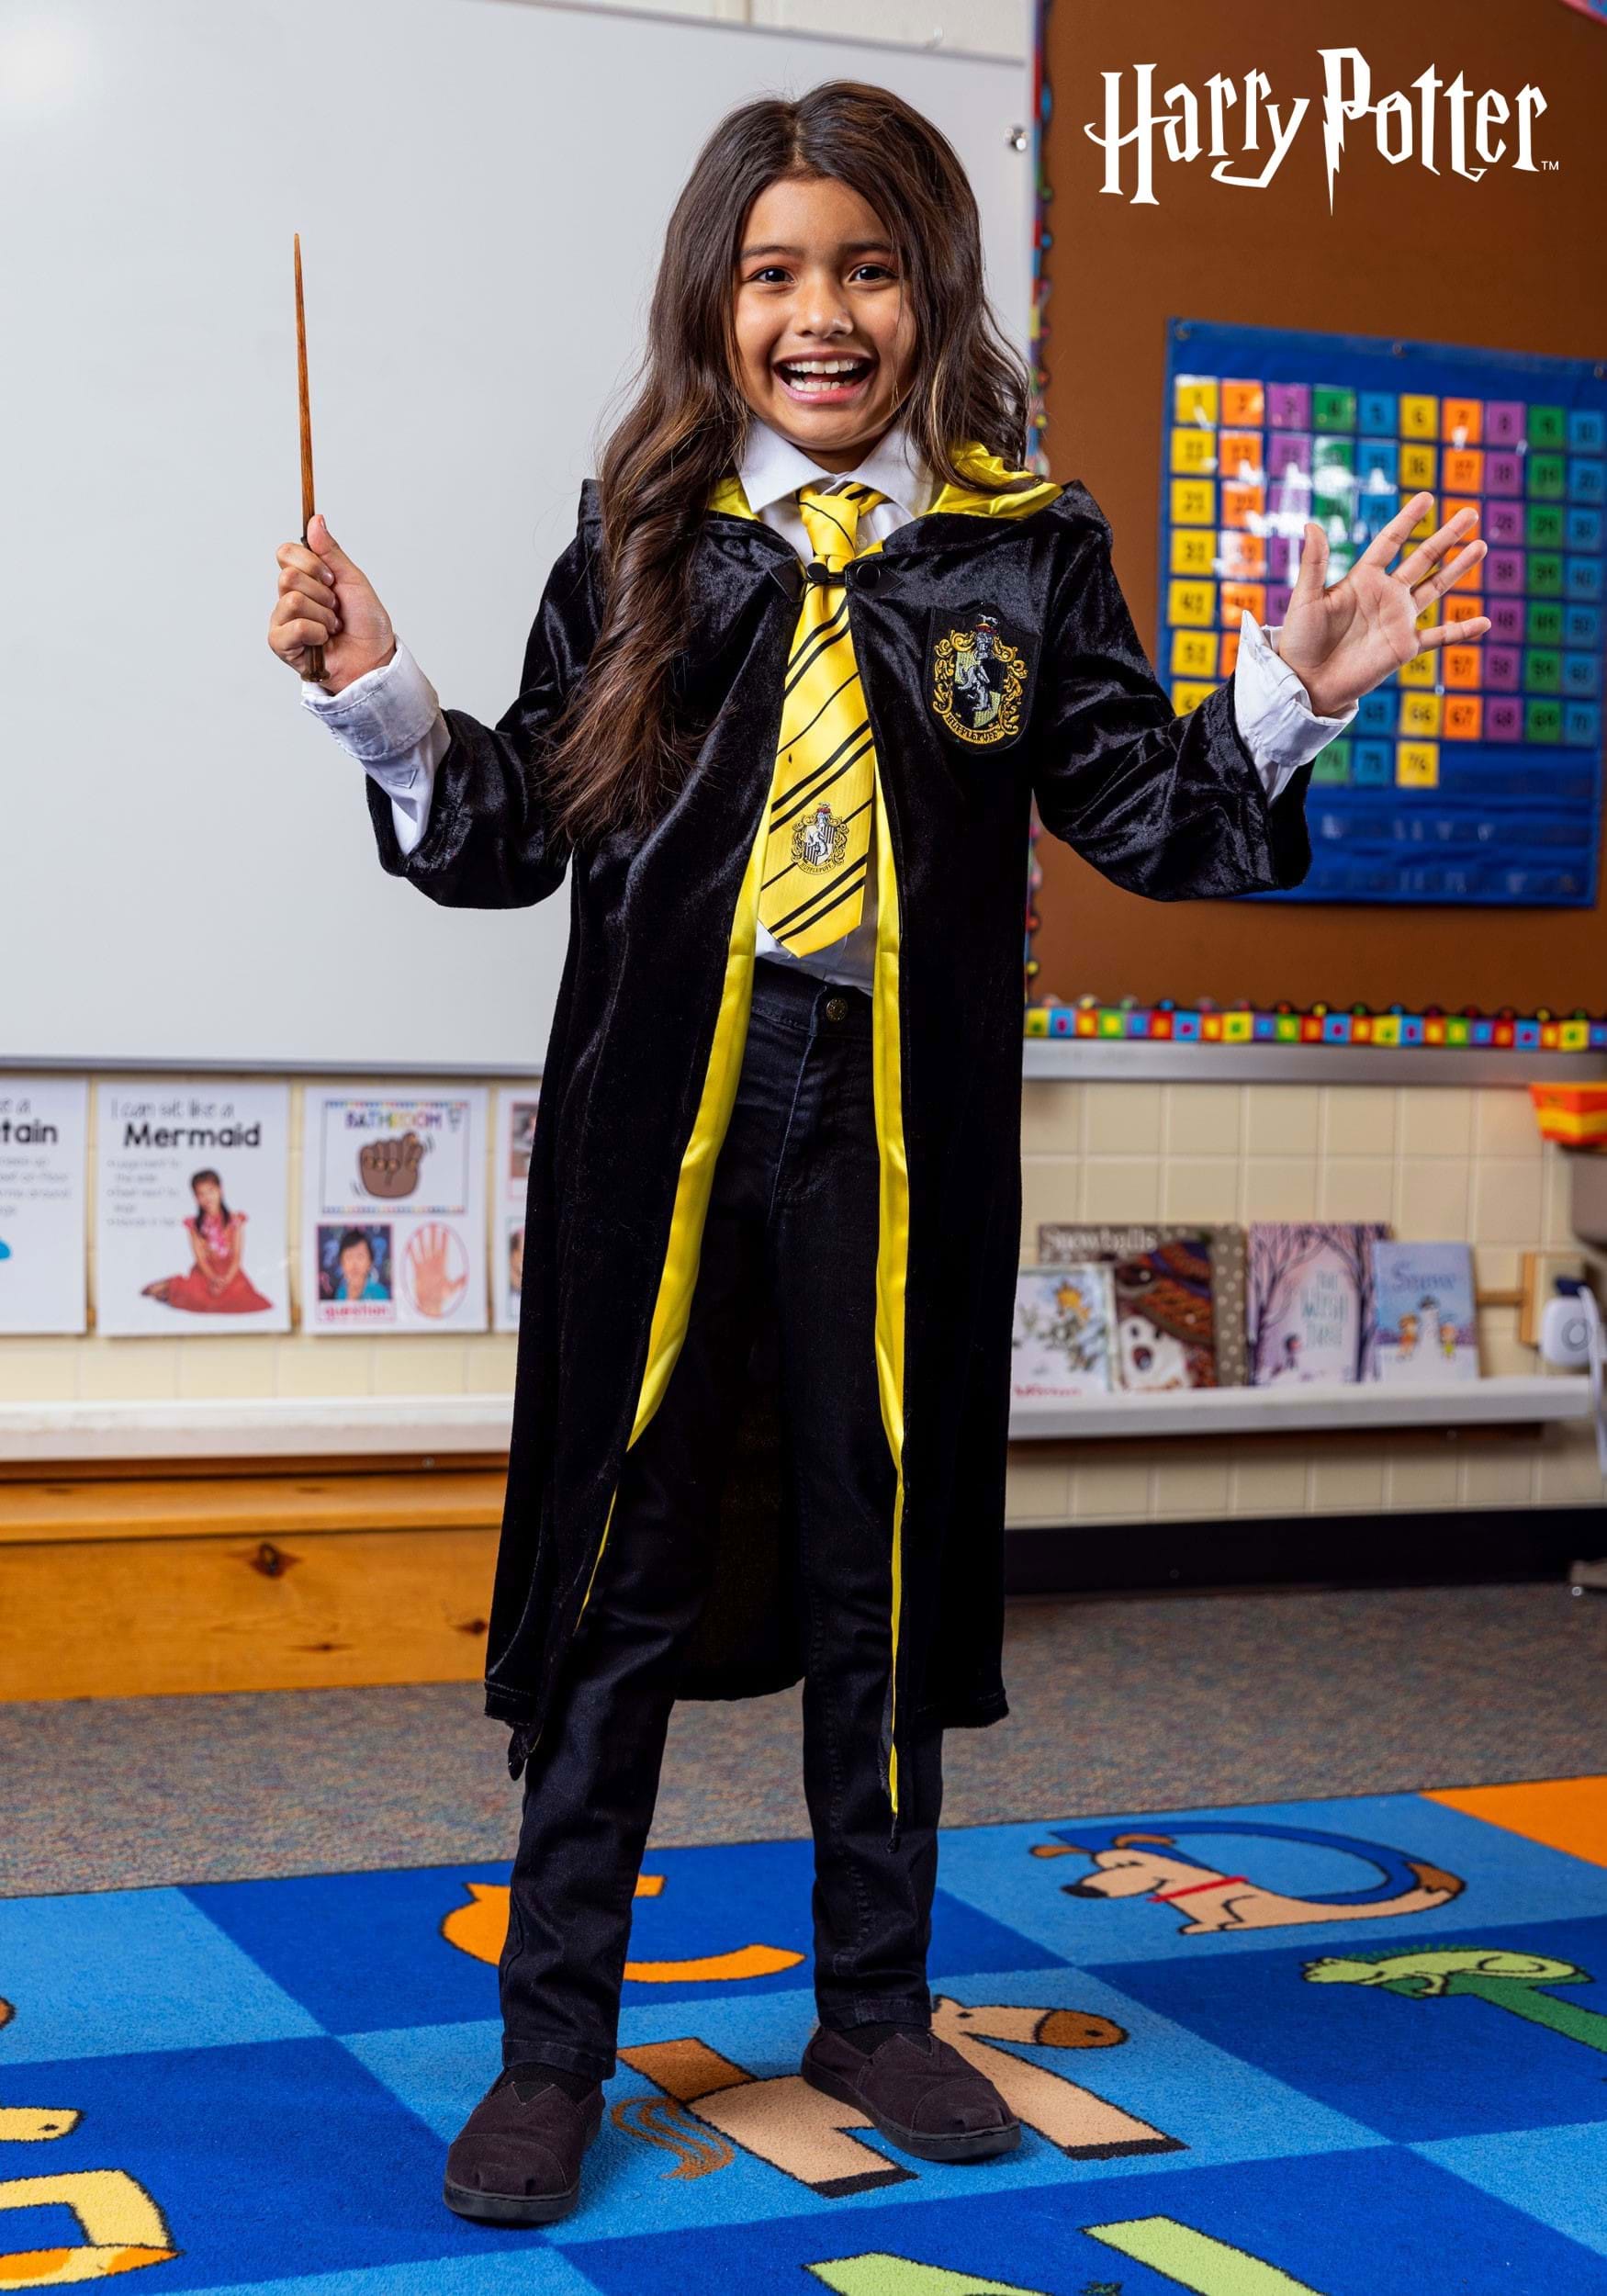 Harry Potter Hufflepuff Robe Kids Fancy Dress Costume Outfit For Book Week  Fashion Clothes, Shoes & Accessories YA9798293